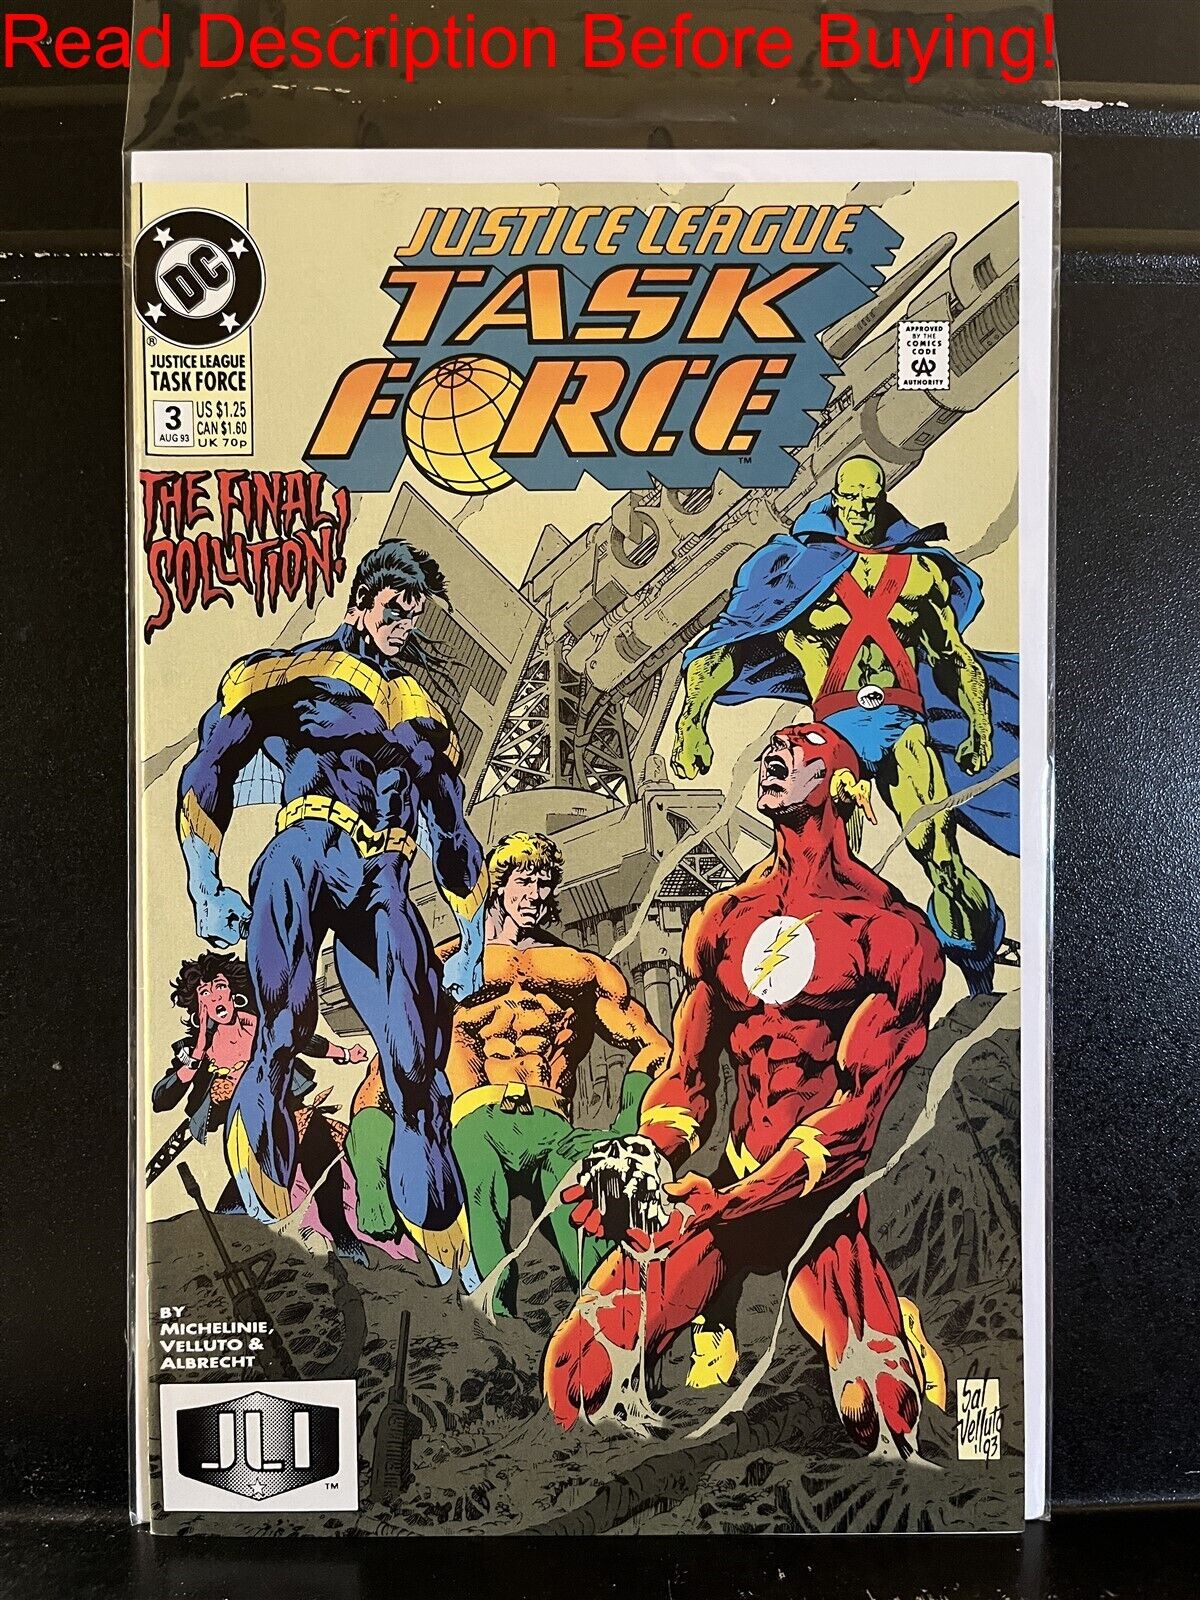 BARGAIN BOOKS ($5 MIN PURCHASE) Justice League Task Force #3 (1993 DC)